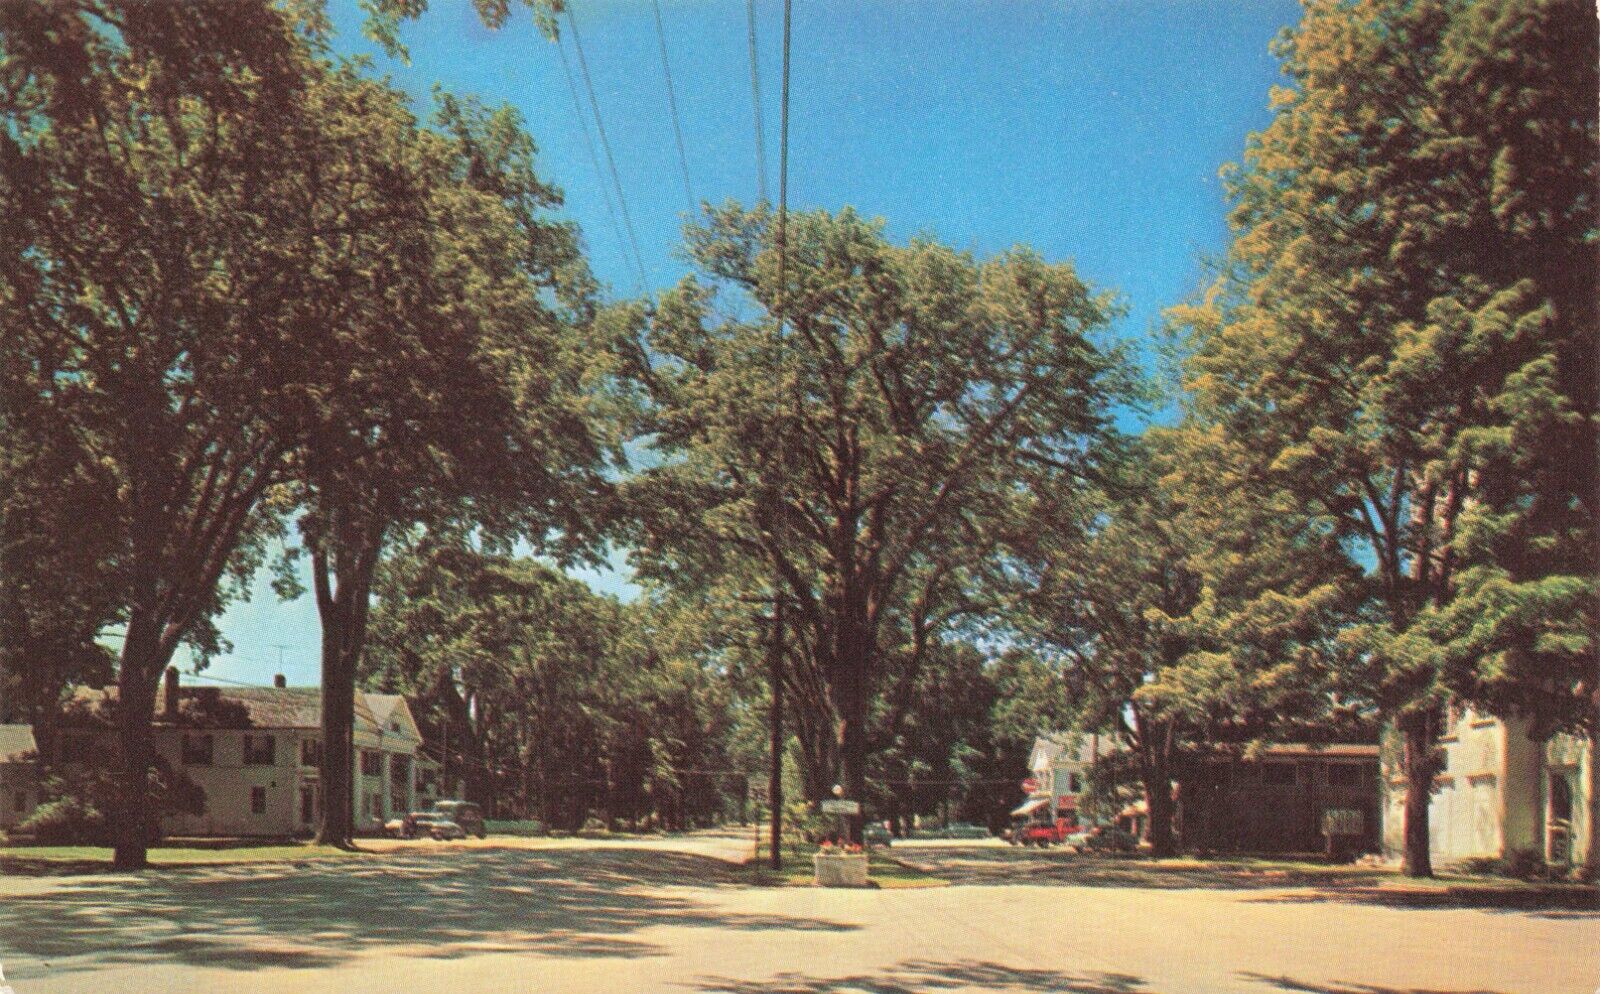 Postcard MA Groton 1964 Main Street View Automobile Parking Lot Middlesex County